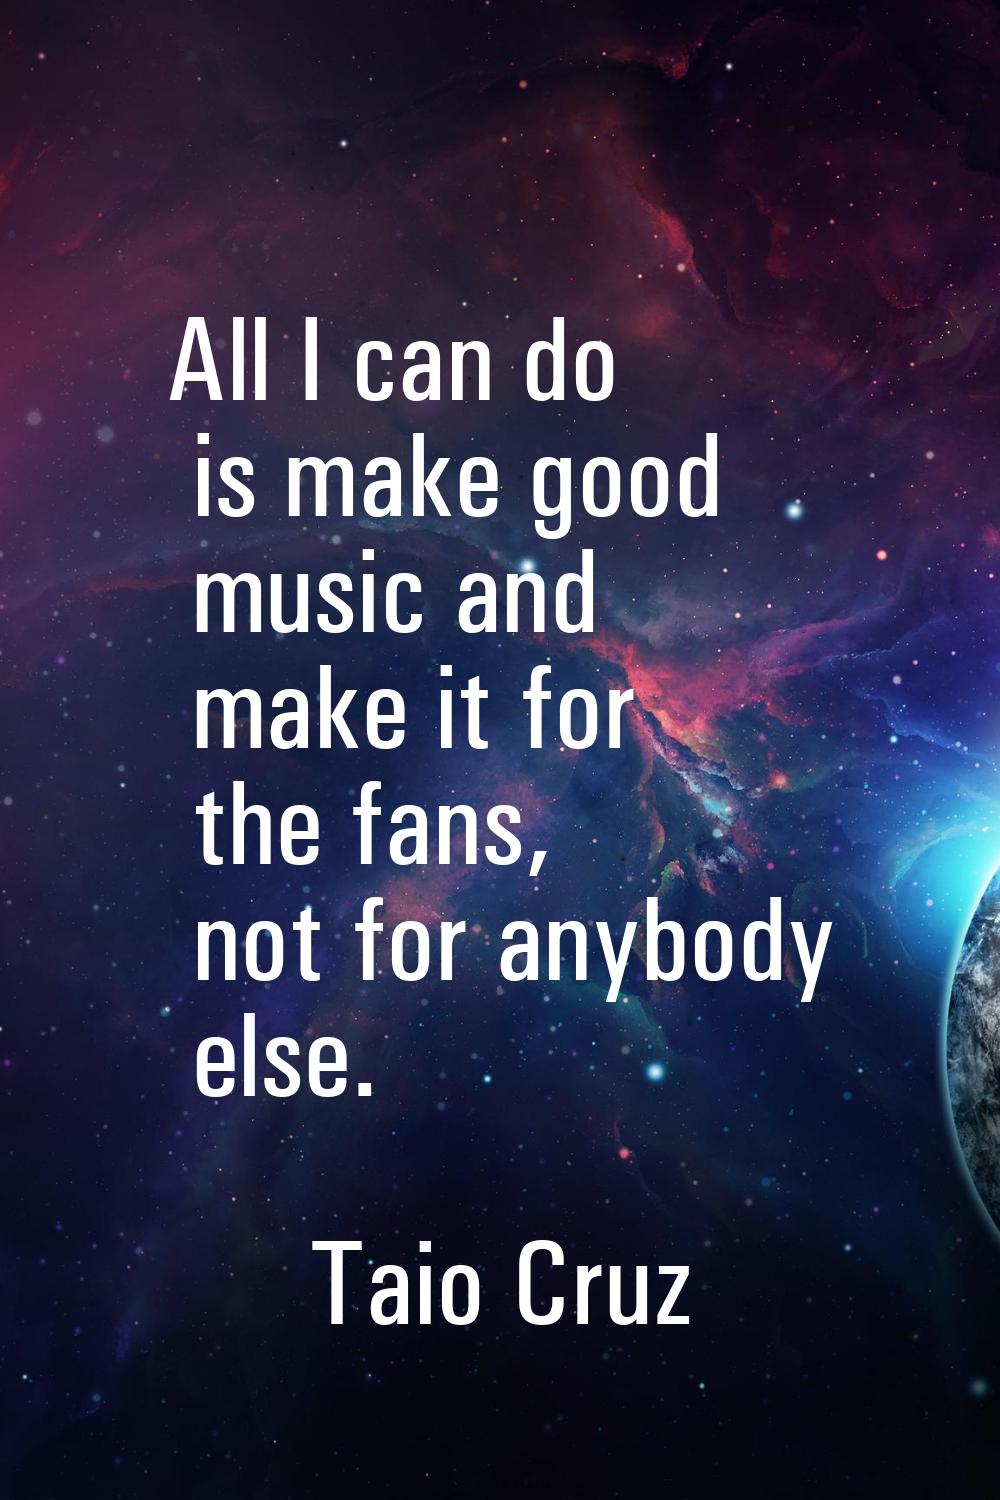 All I can do is make good music and make it for the fans, not for anybody else.